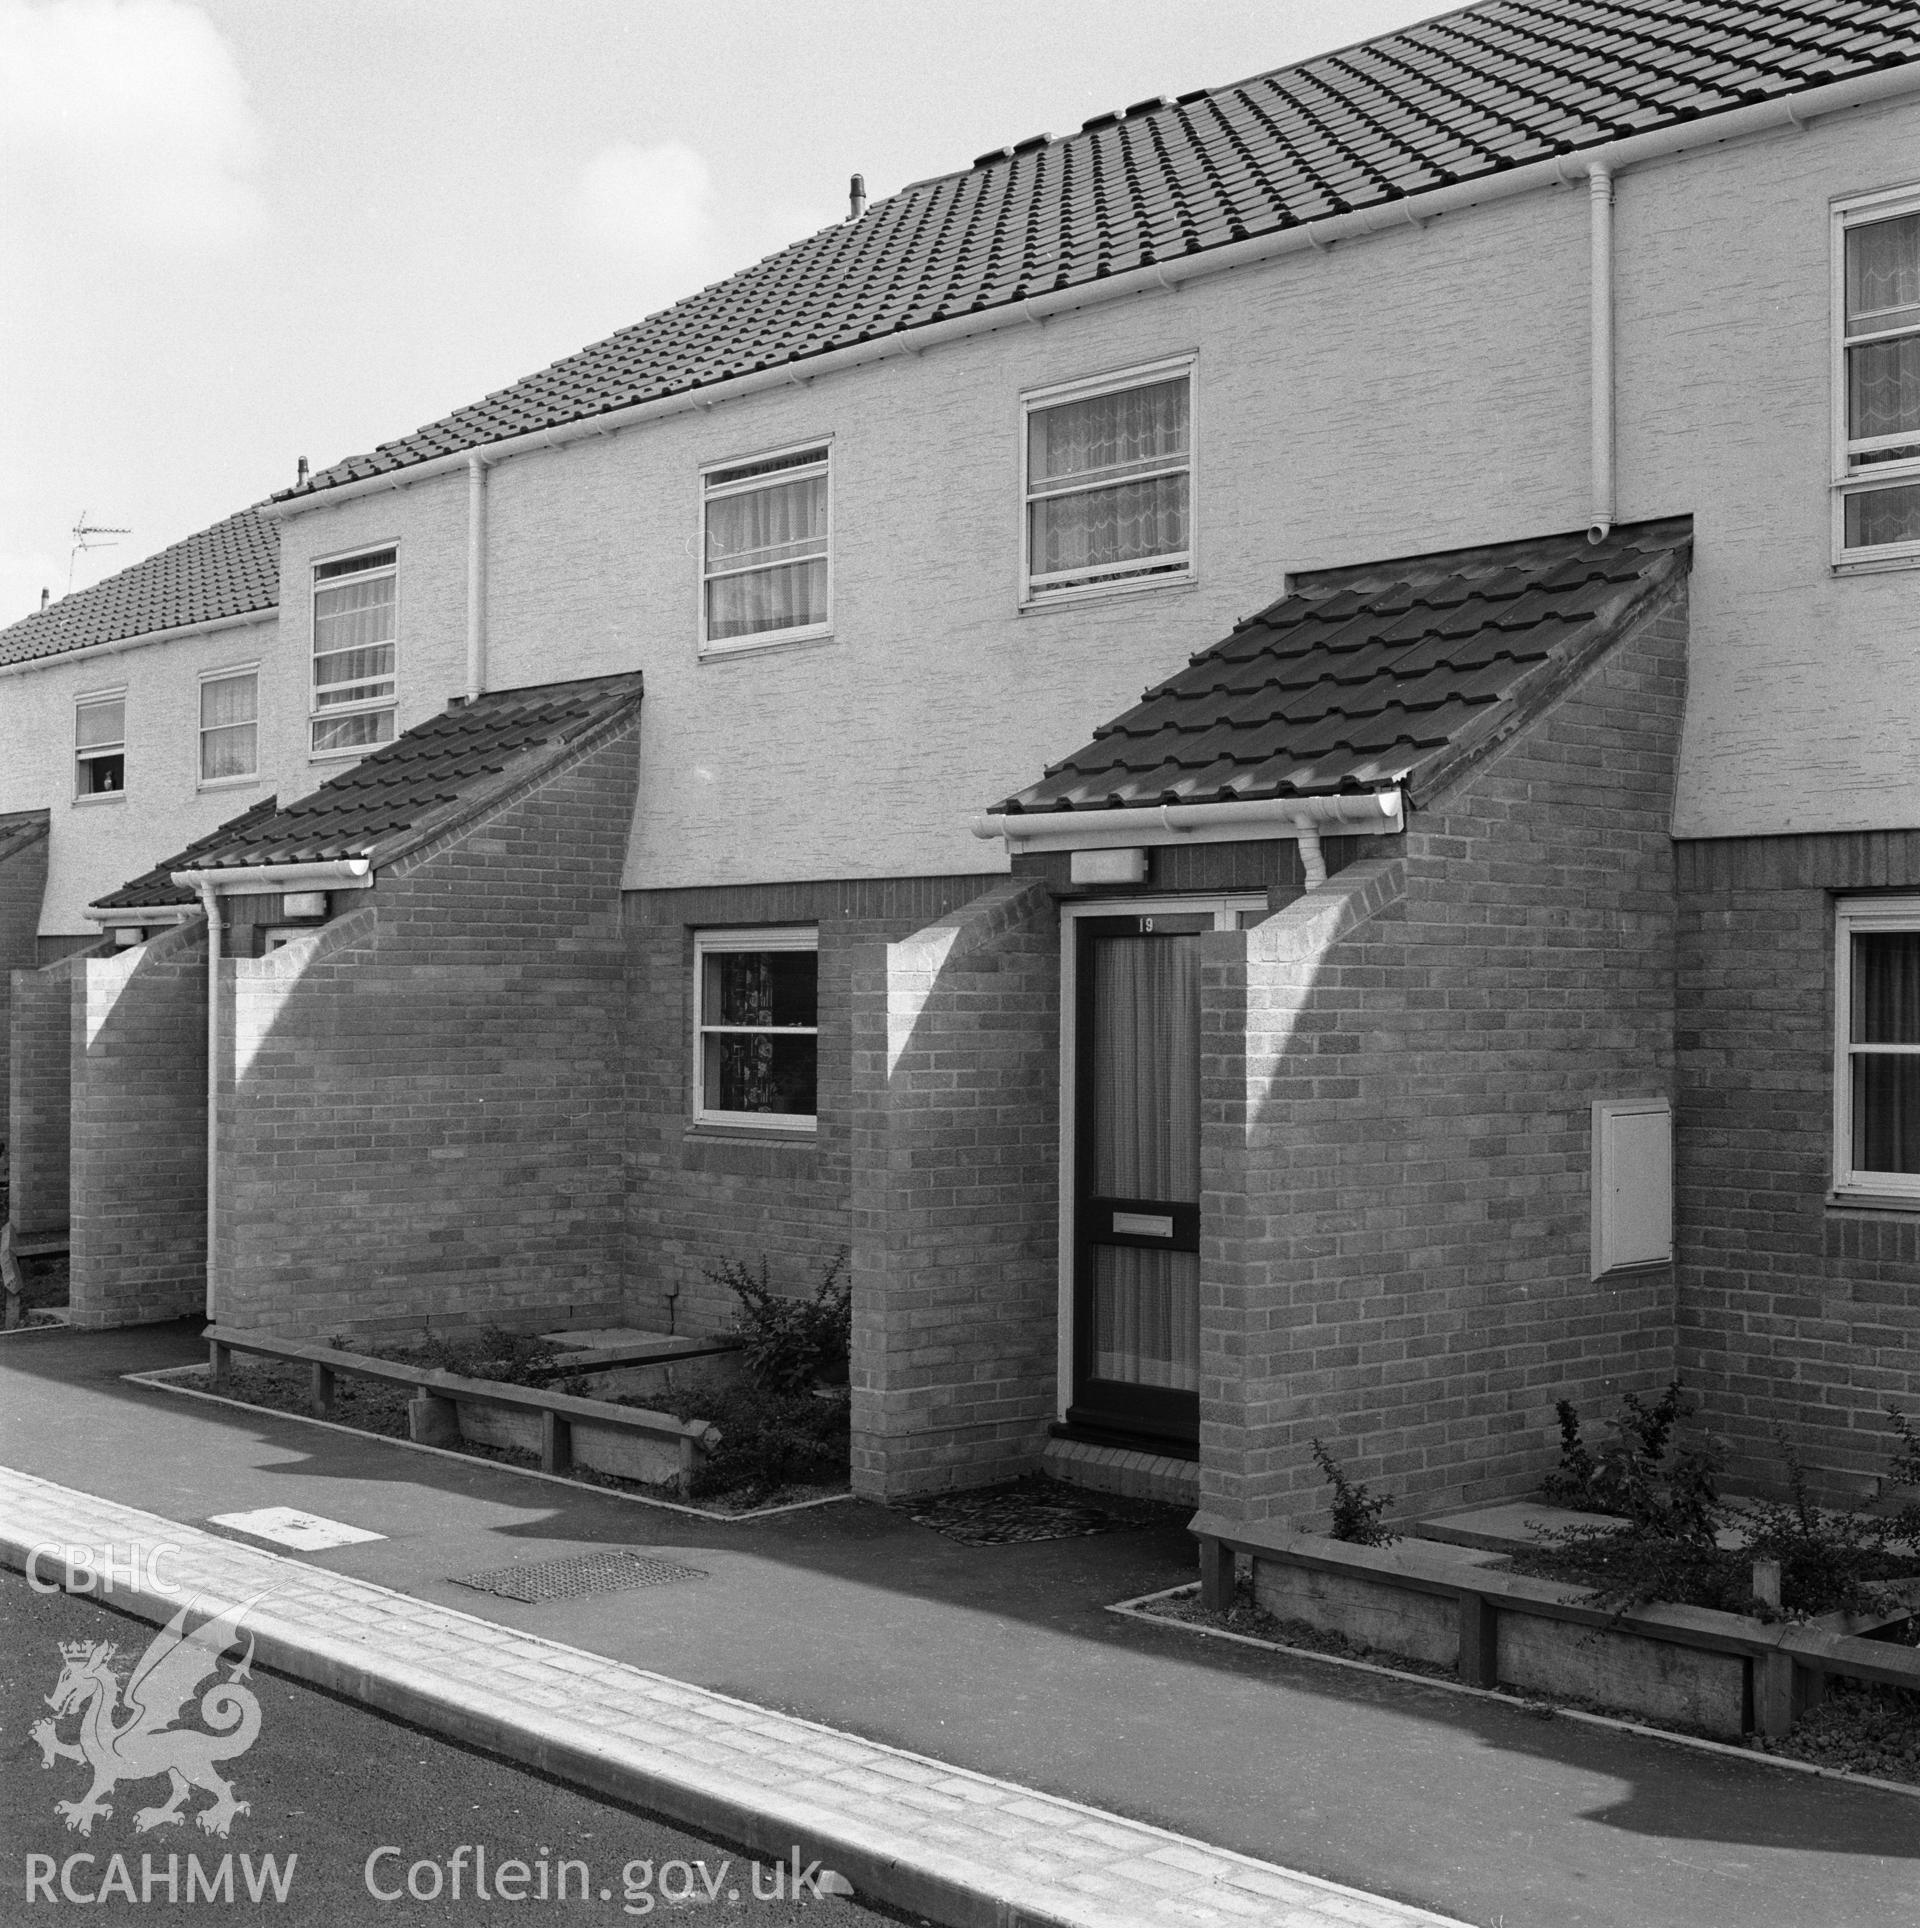 1 photographic negative showing new housing on Shaftesbury Street, Newport; collated by the former Central Office of Information.